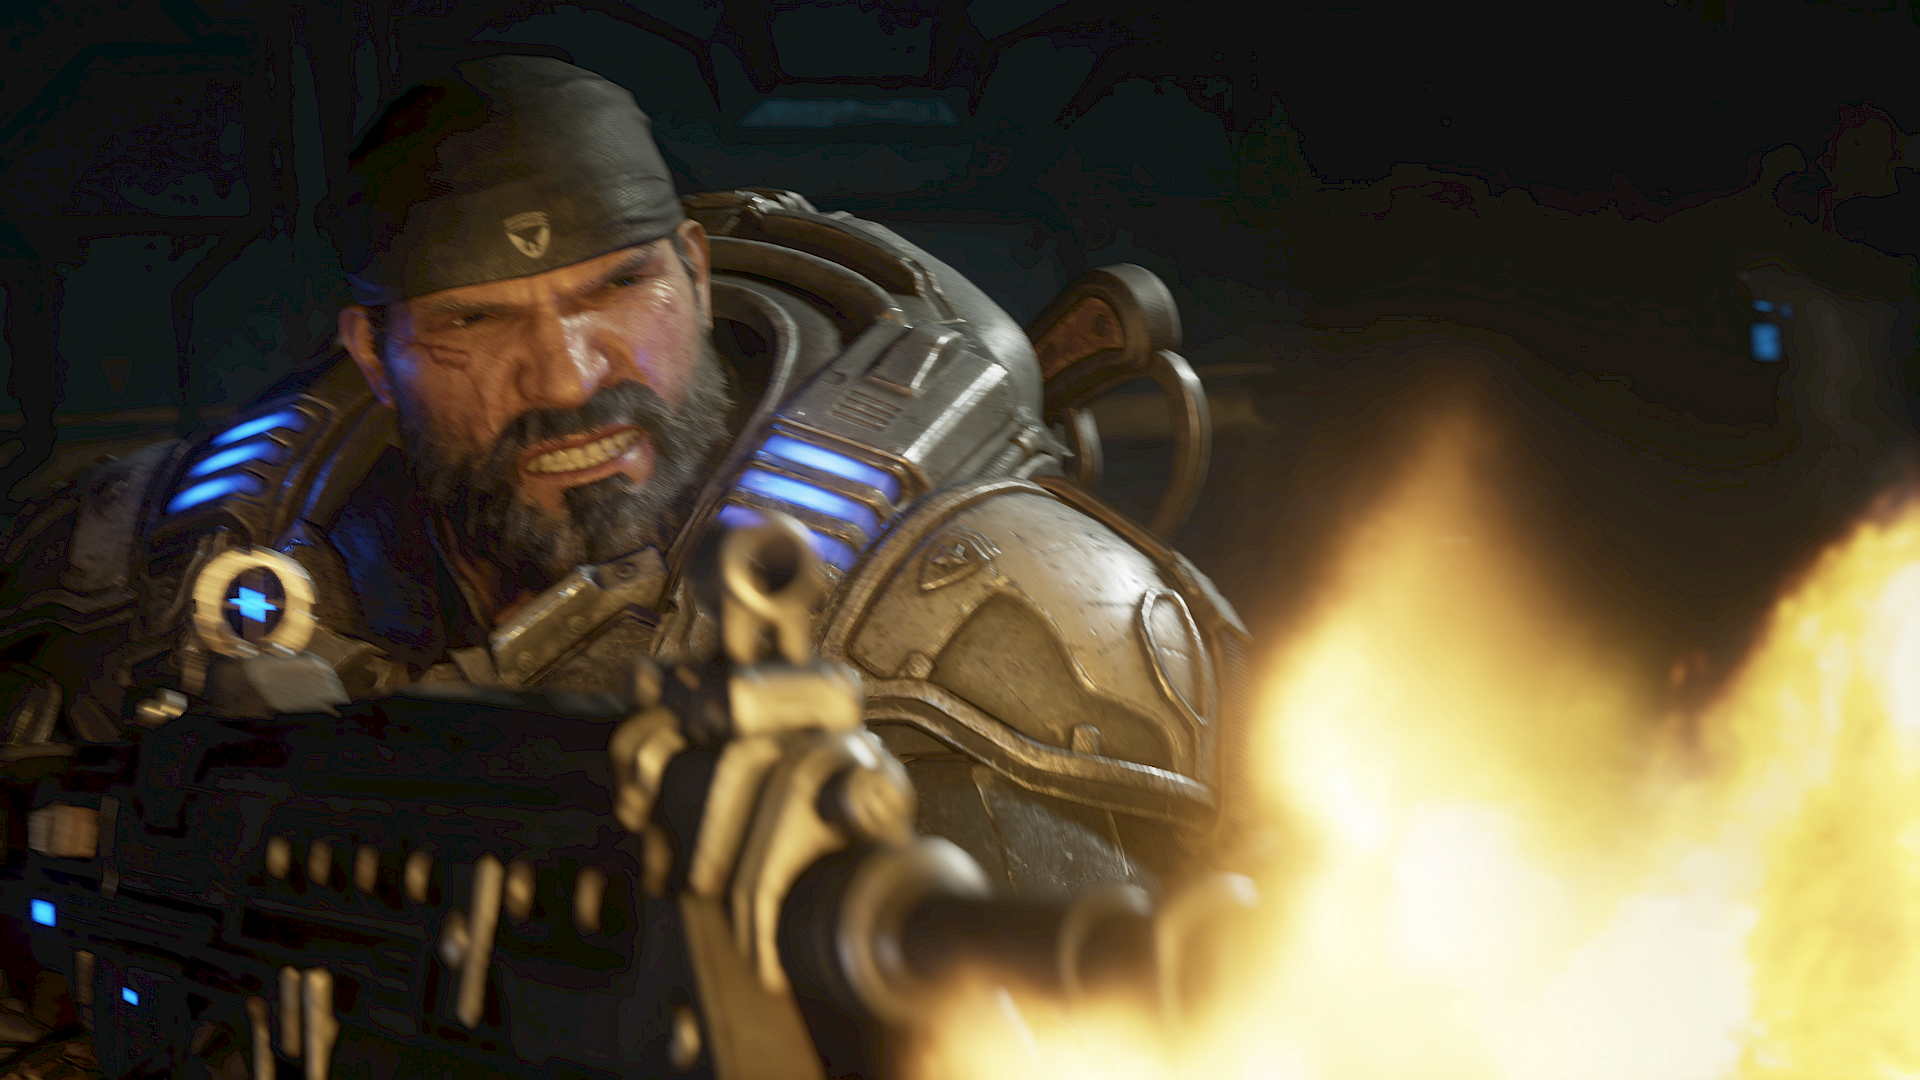 Here's some more gameplay footage for Gears 5 